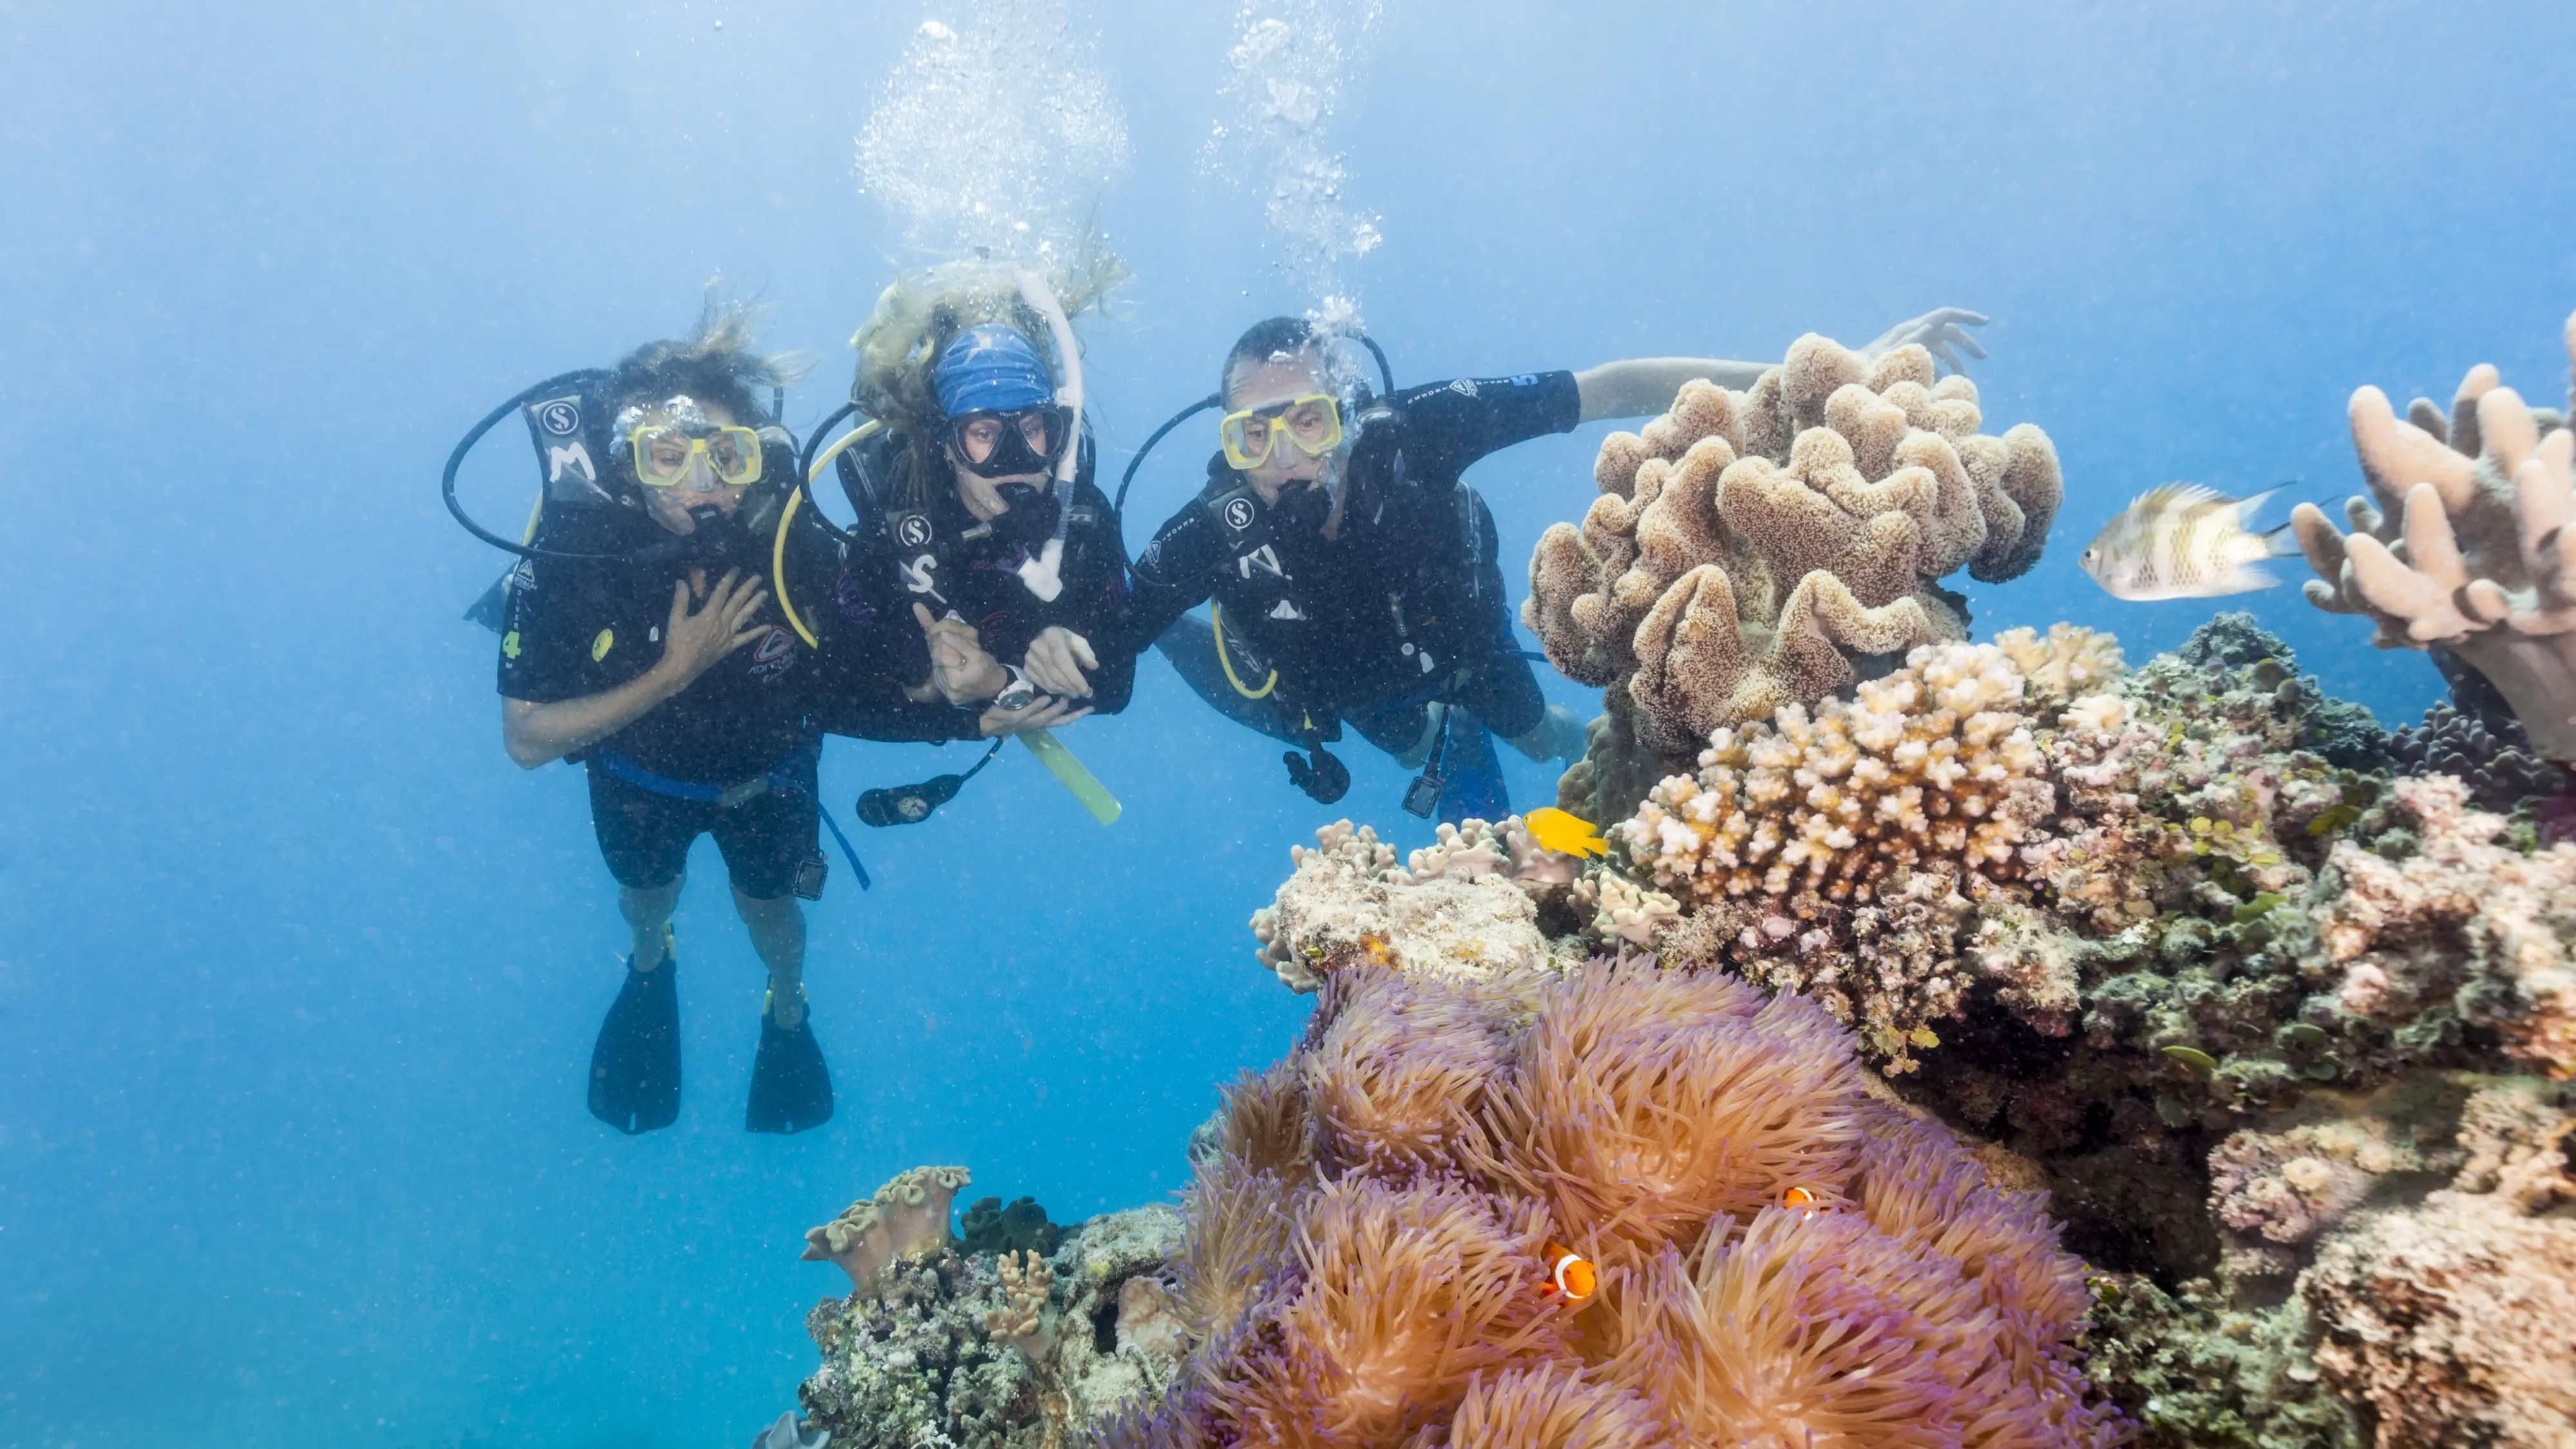 Three people in diving gear, underwater with colourful coral in the foreground. Image credit: Tourism and Events Queensland